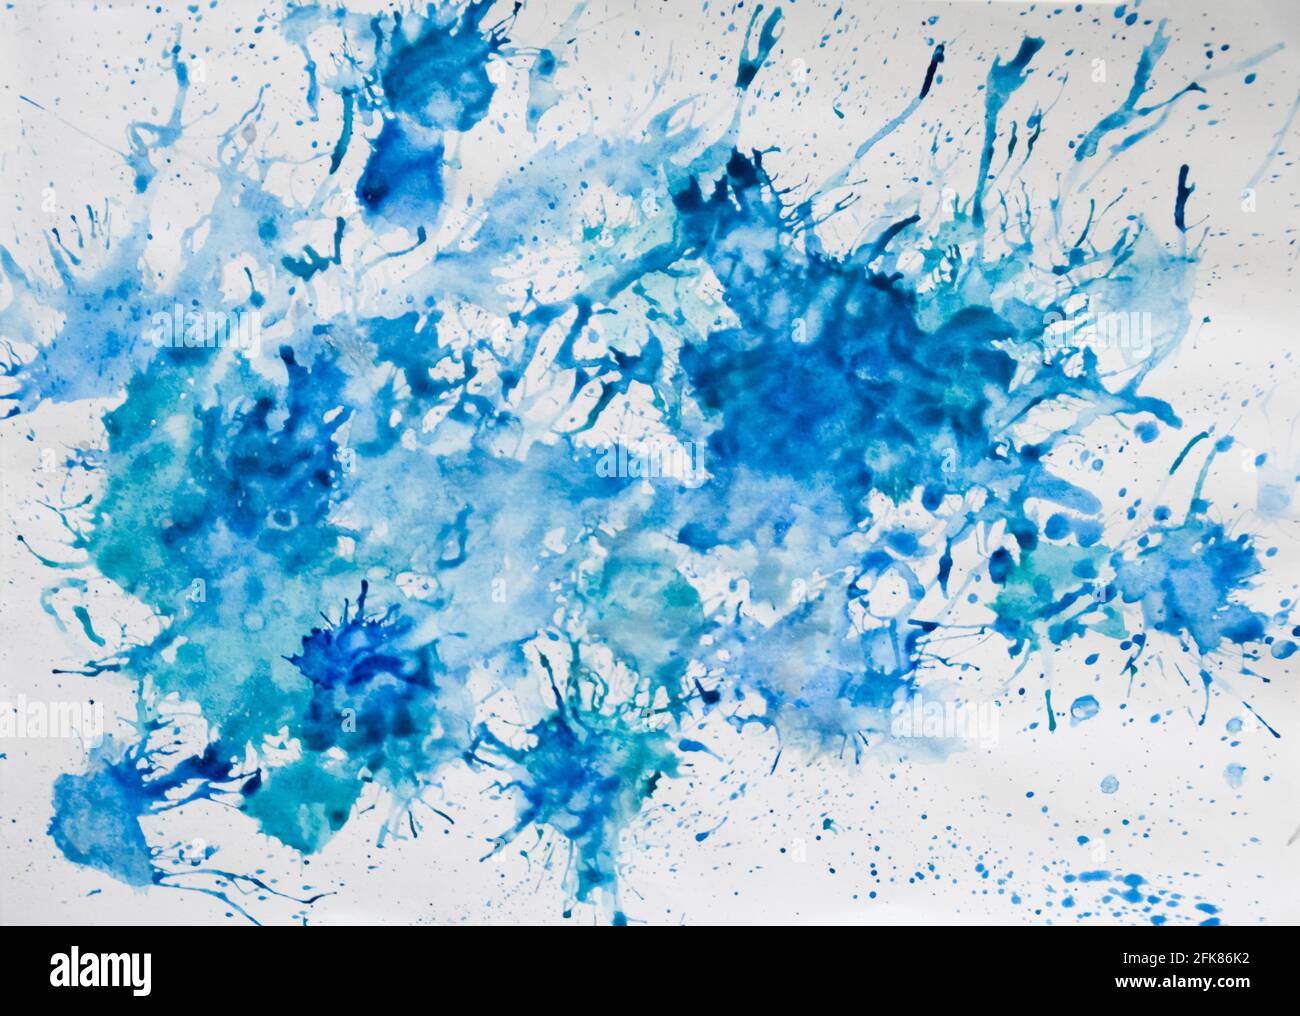 Blue splashes of watercolor paint on paper. Blue splashes of watercolor ...